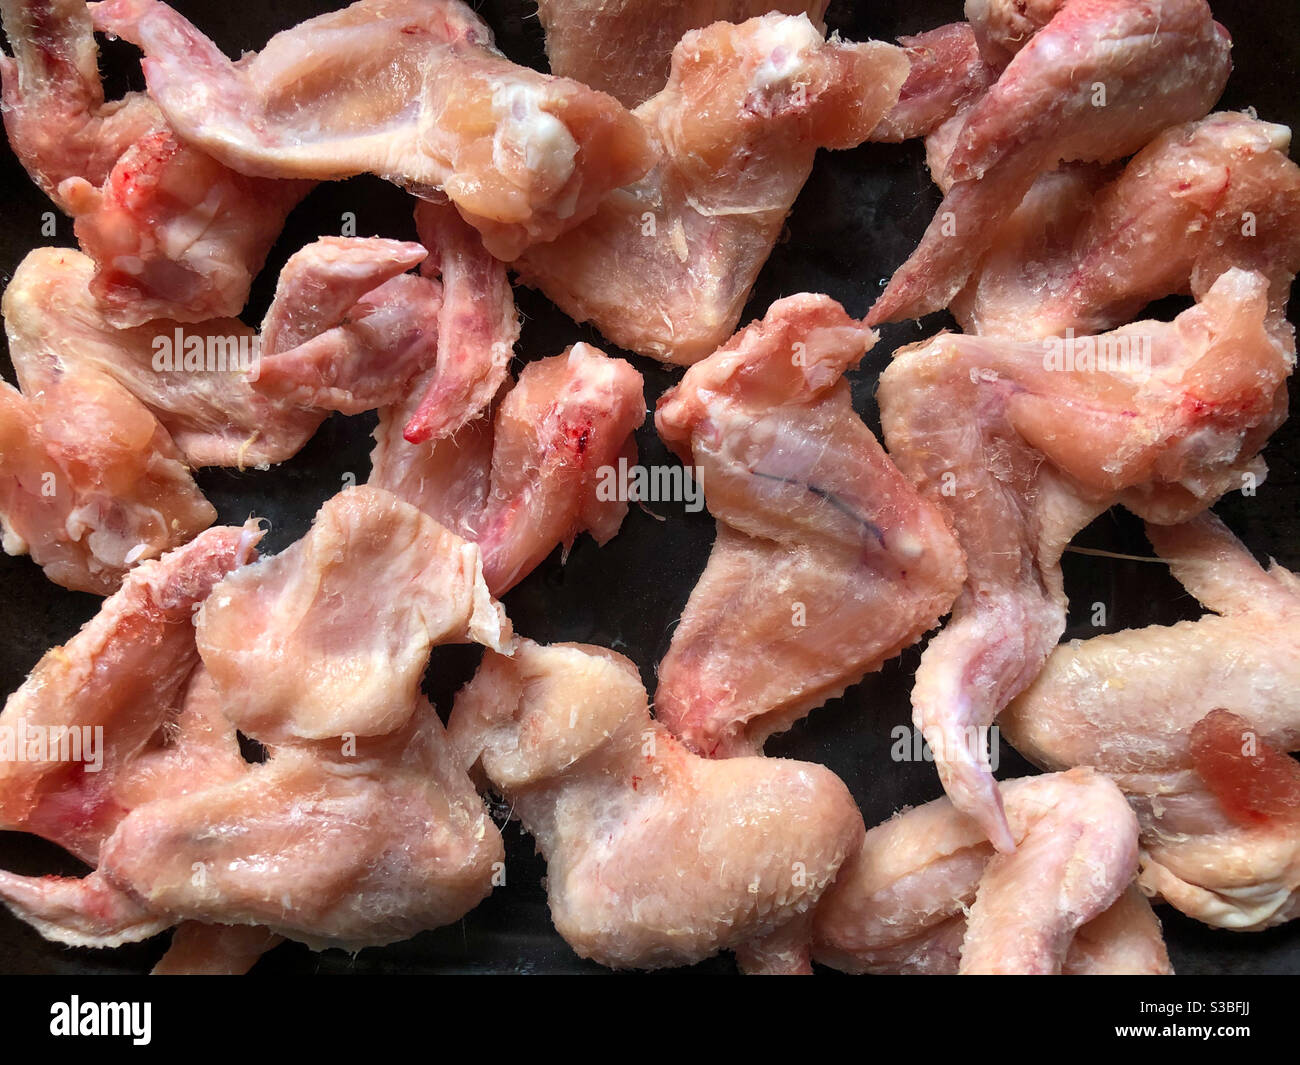 Raw chicken wings defrosting in a baking tray. Stock Photo